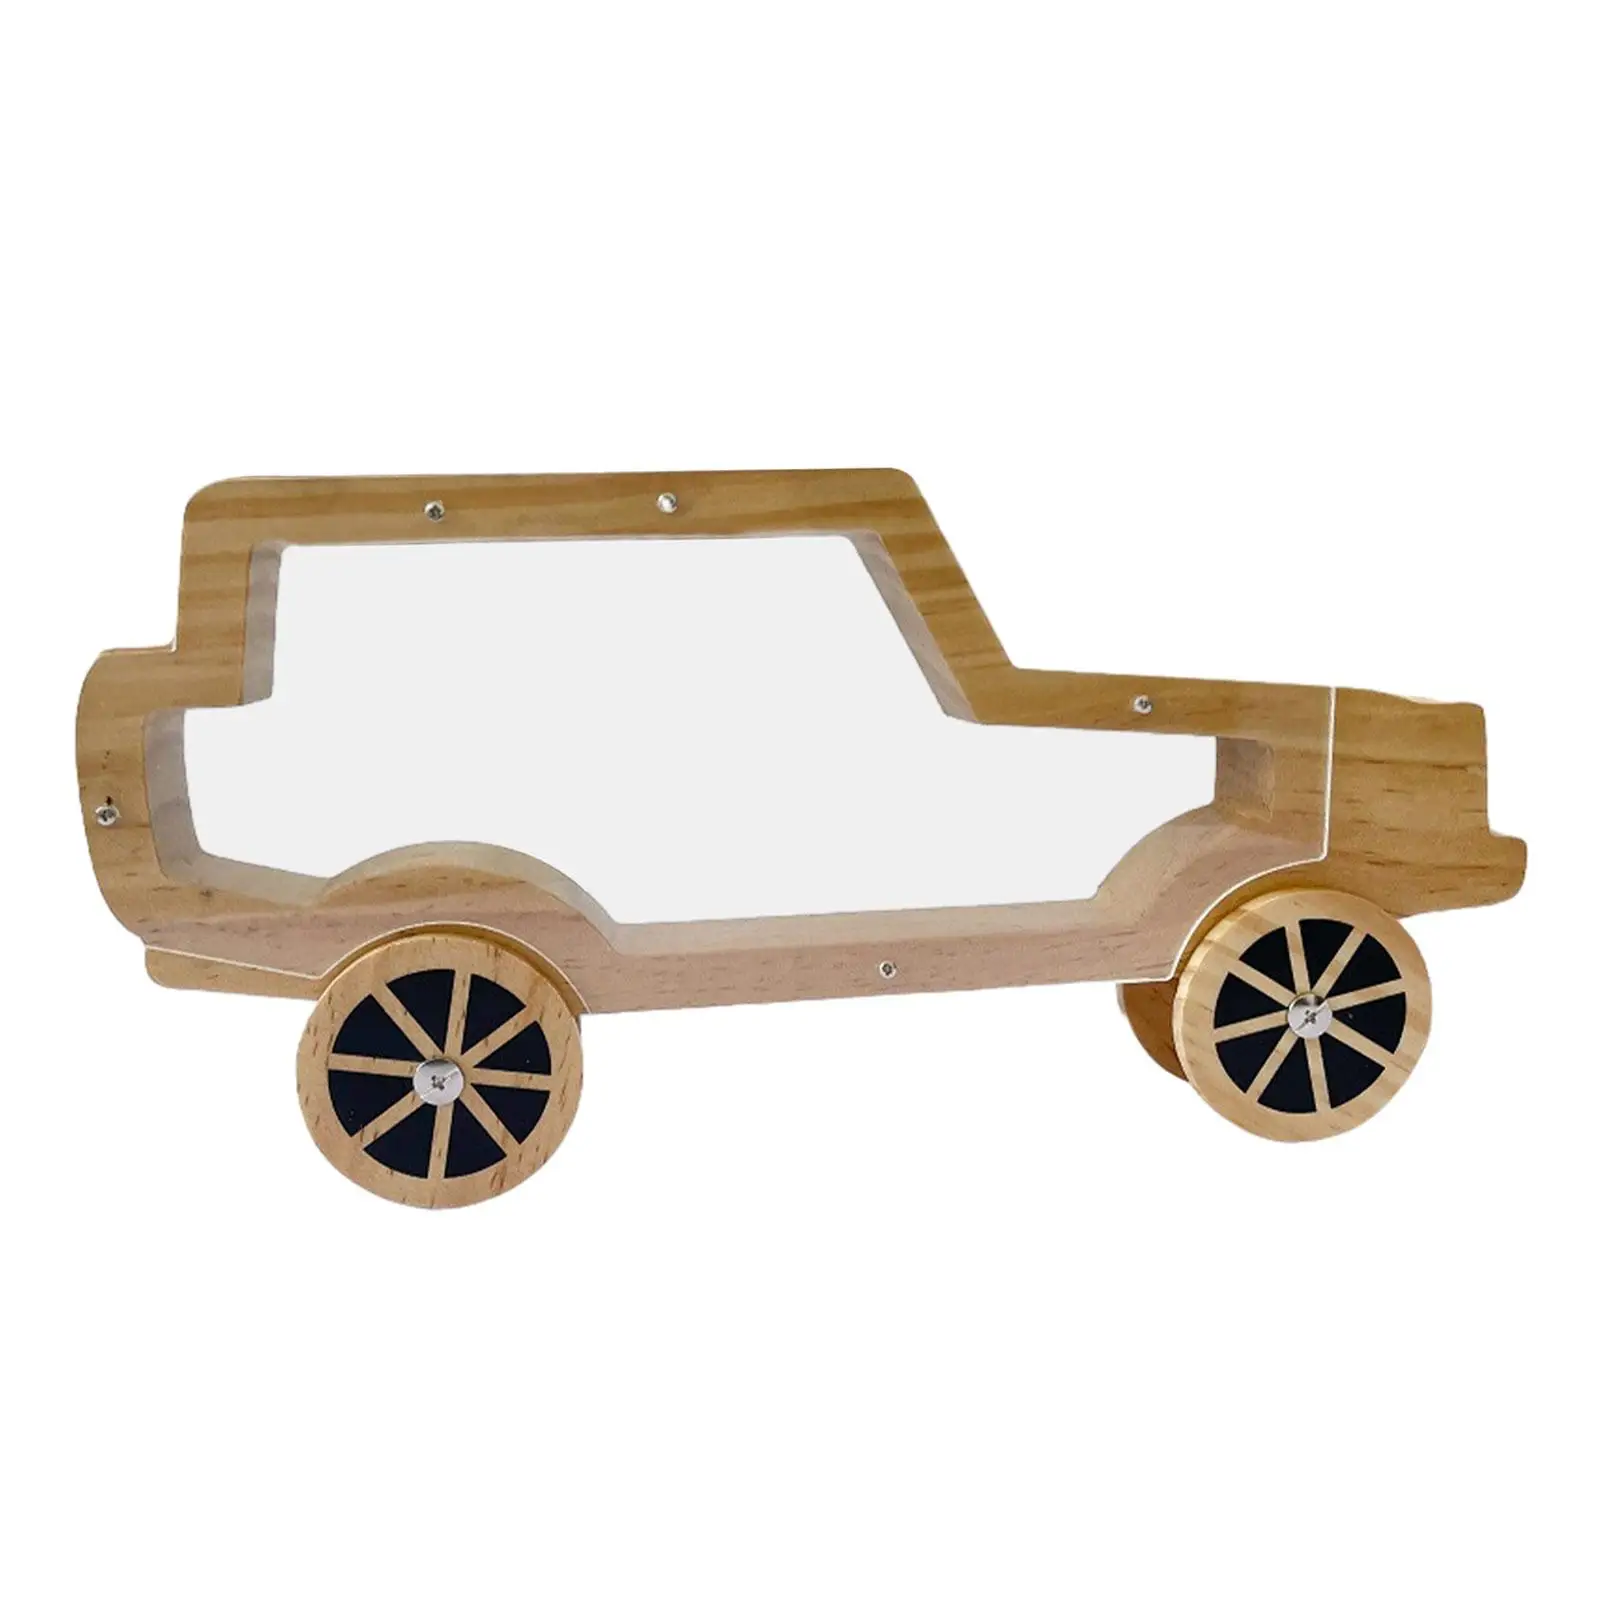 Wooden Creative Car Shaped Piggy Bank Visible Children Education Creative Tips Storage Case Money Box Container for Holiday Gift